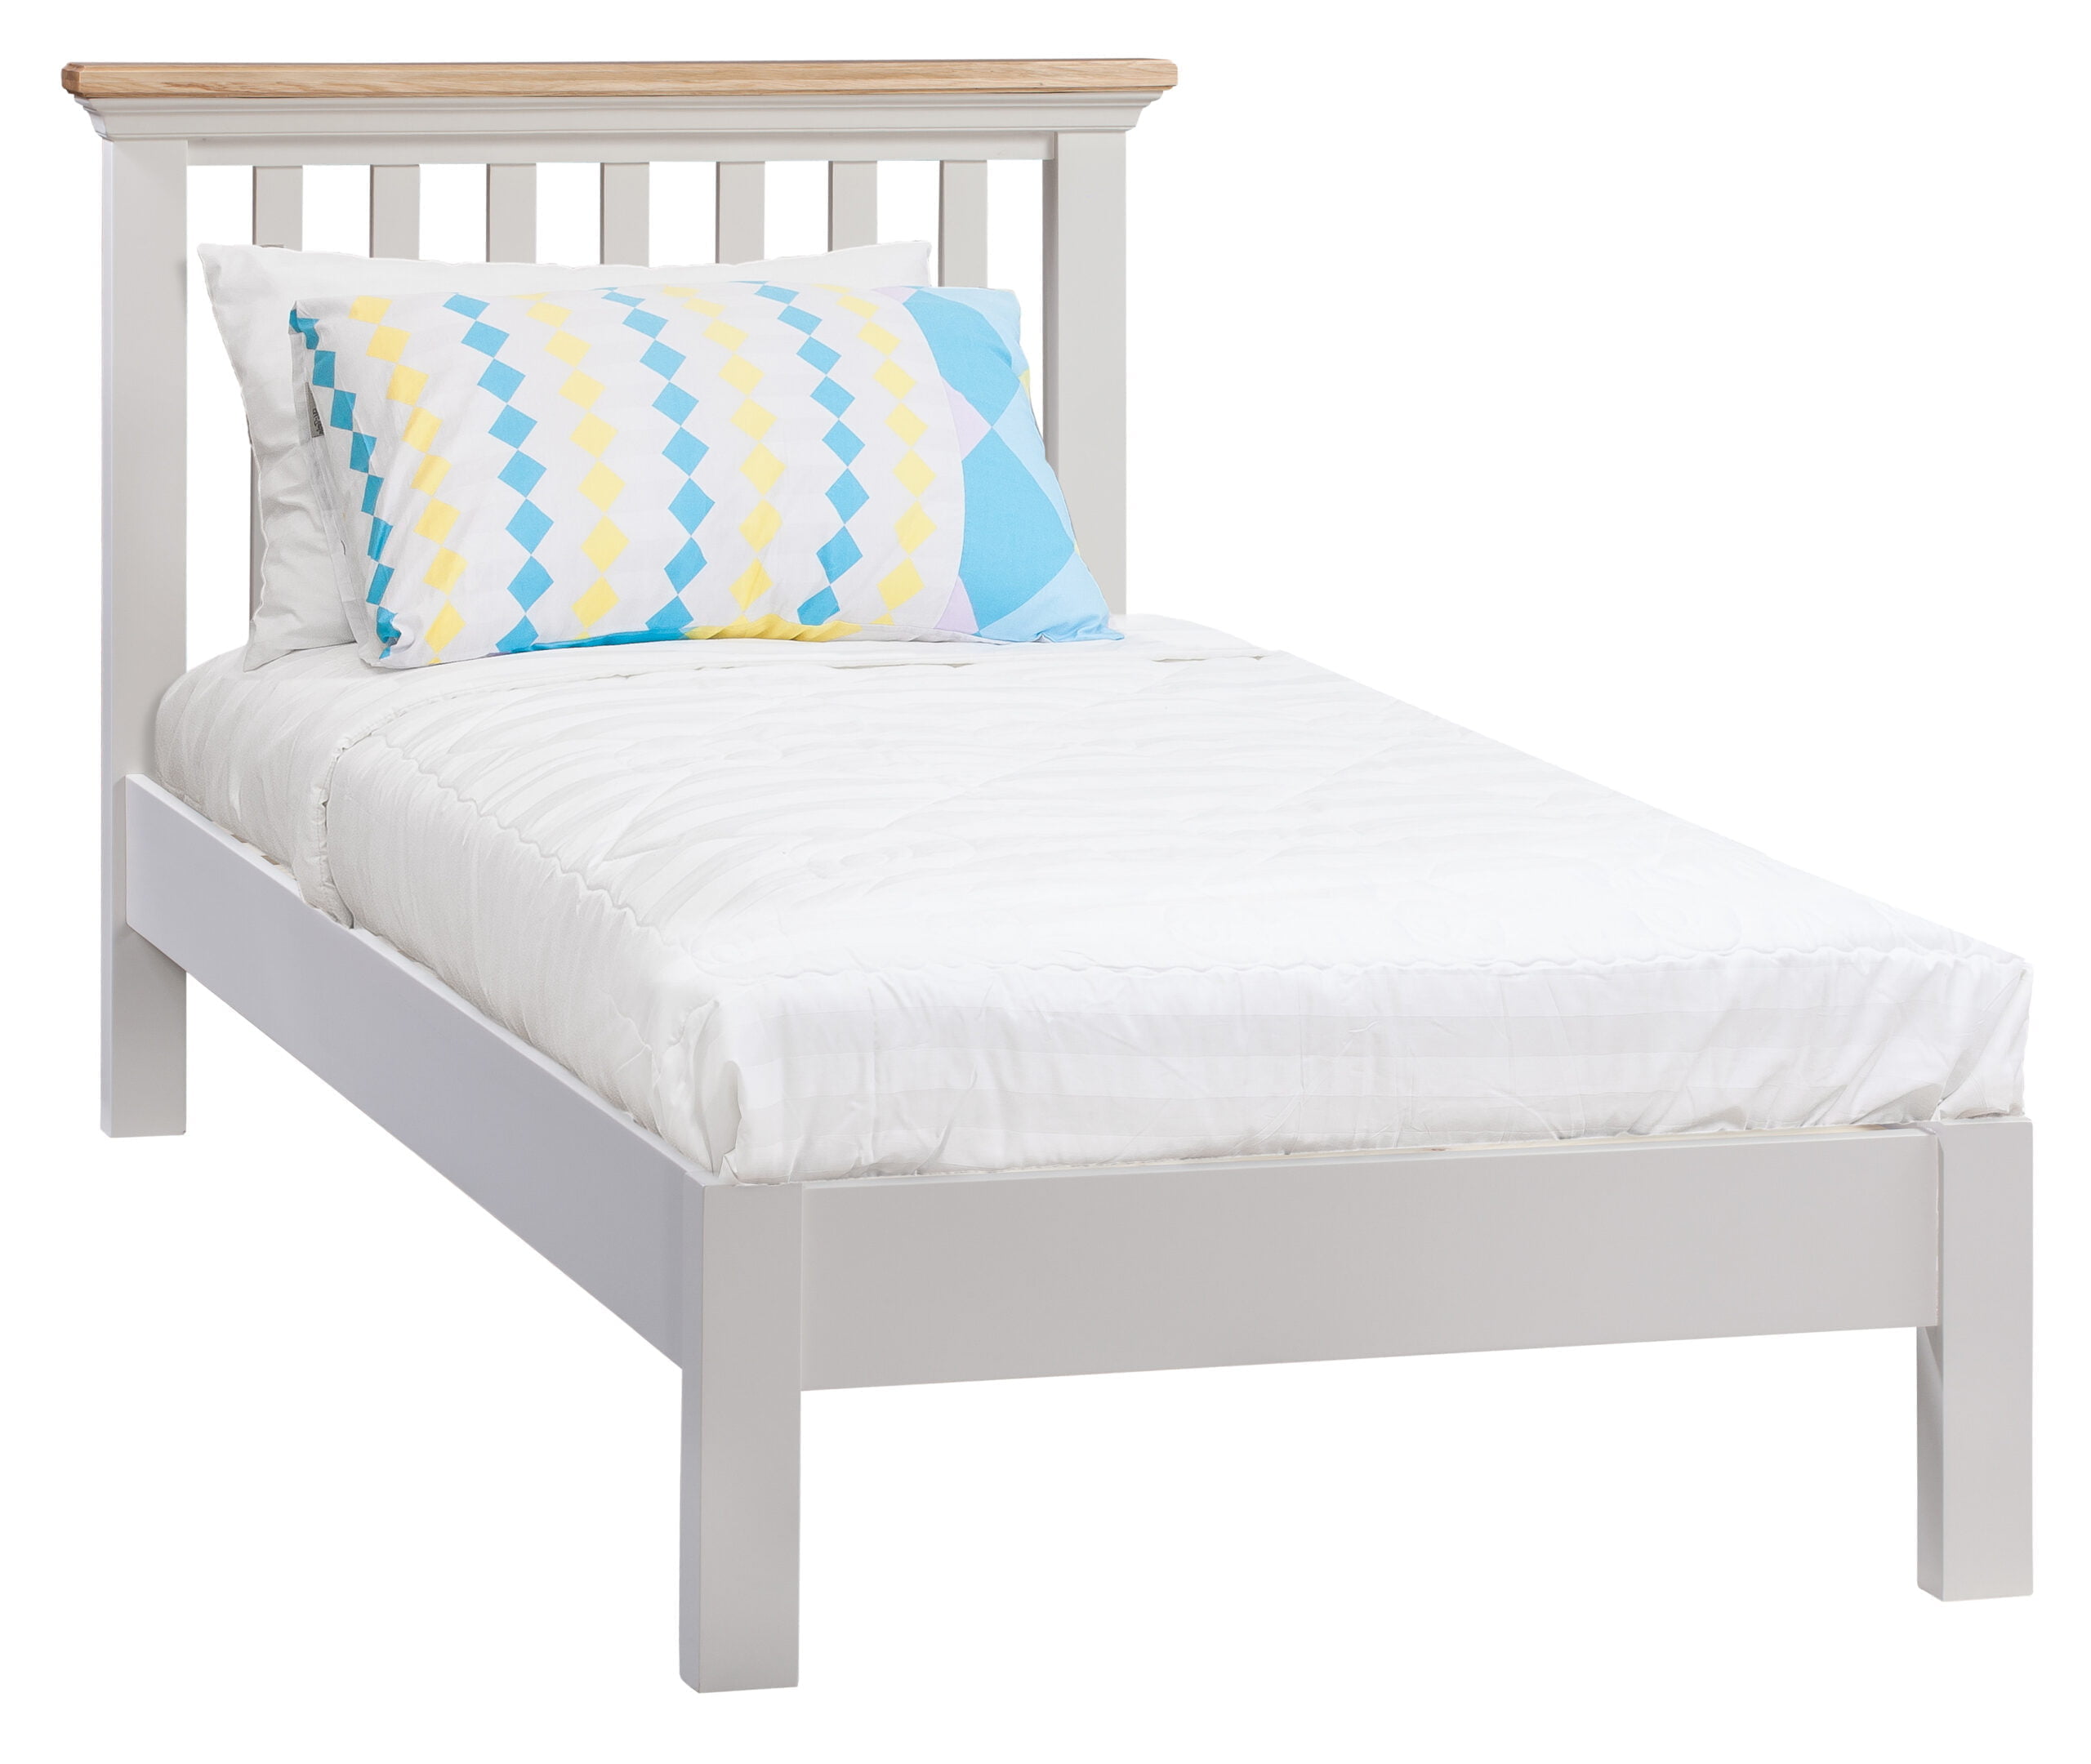 COT3BED scaled